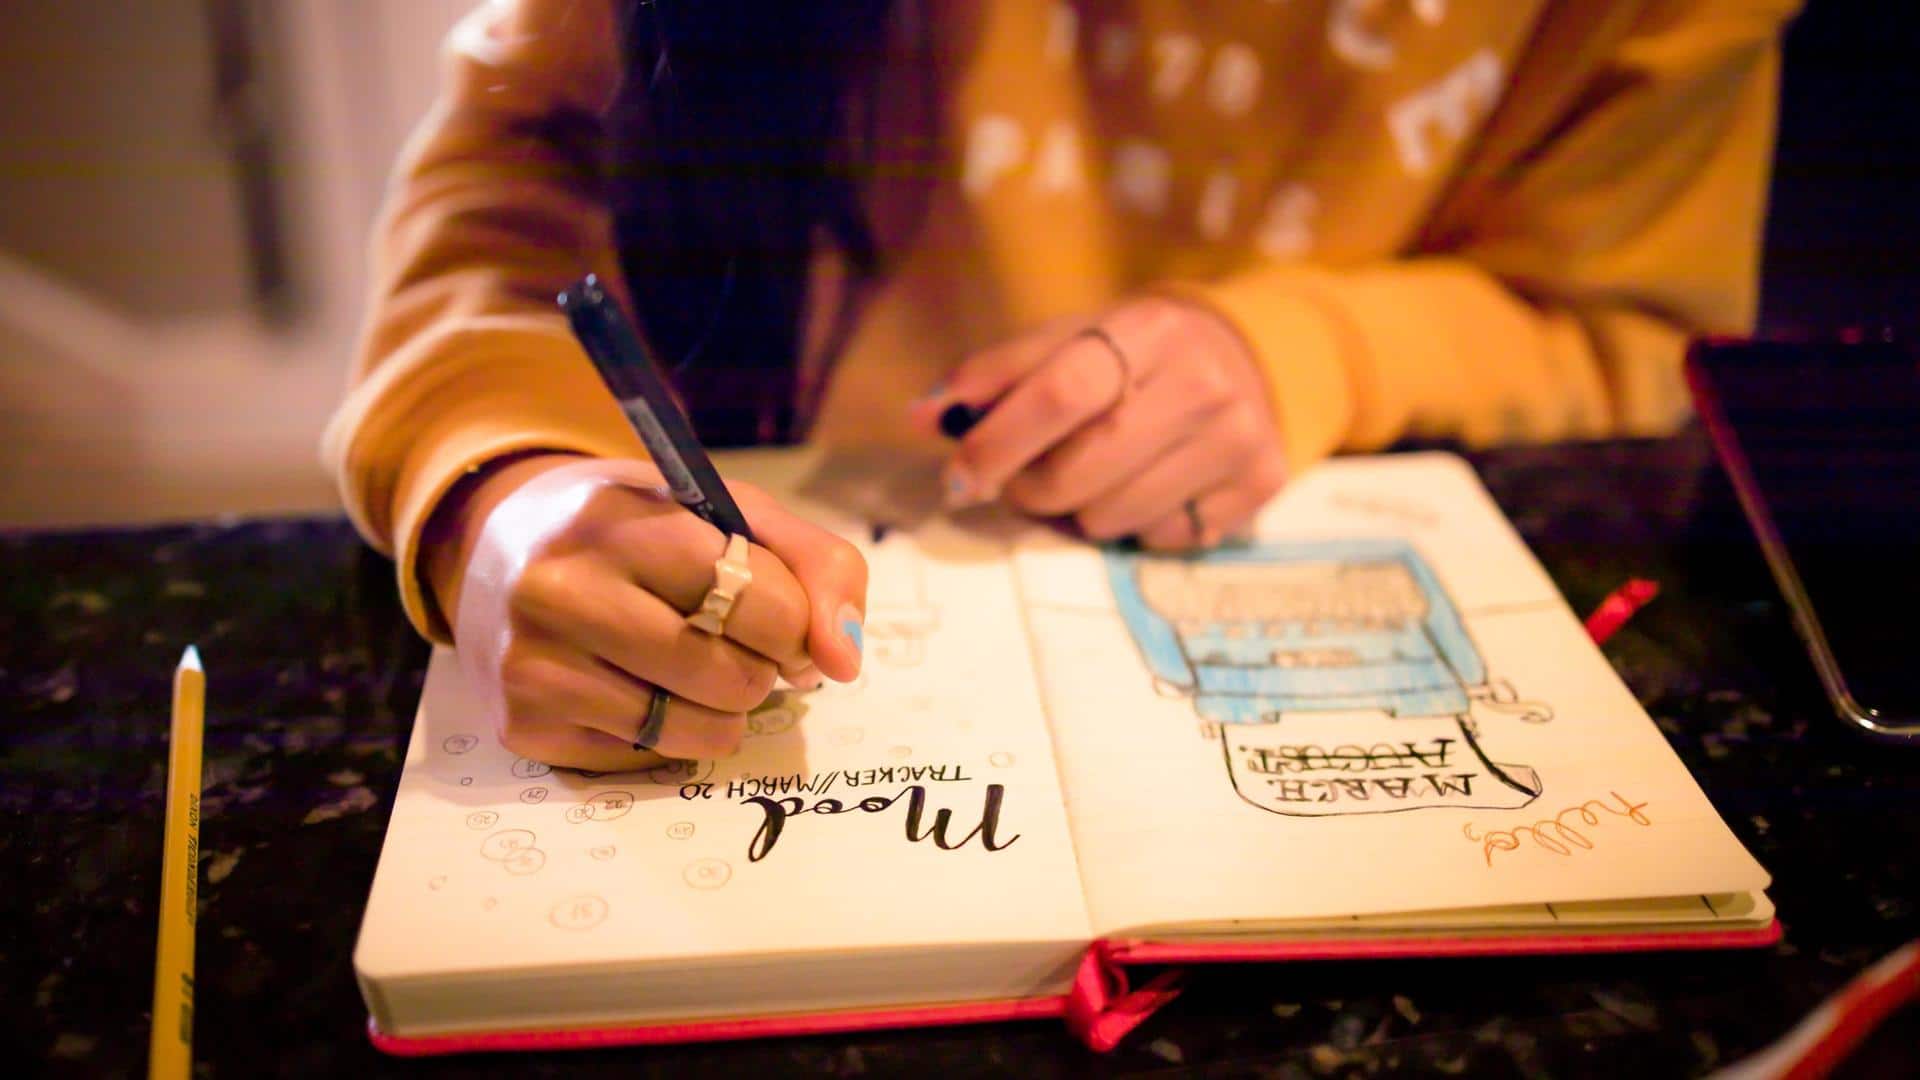 Journaling is cathartic. Here's why you should do it daily